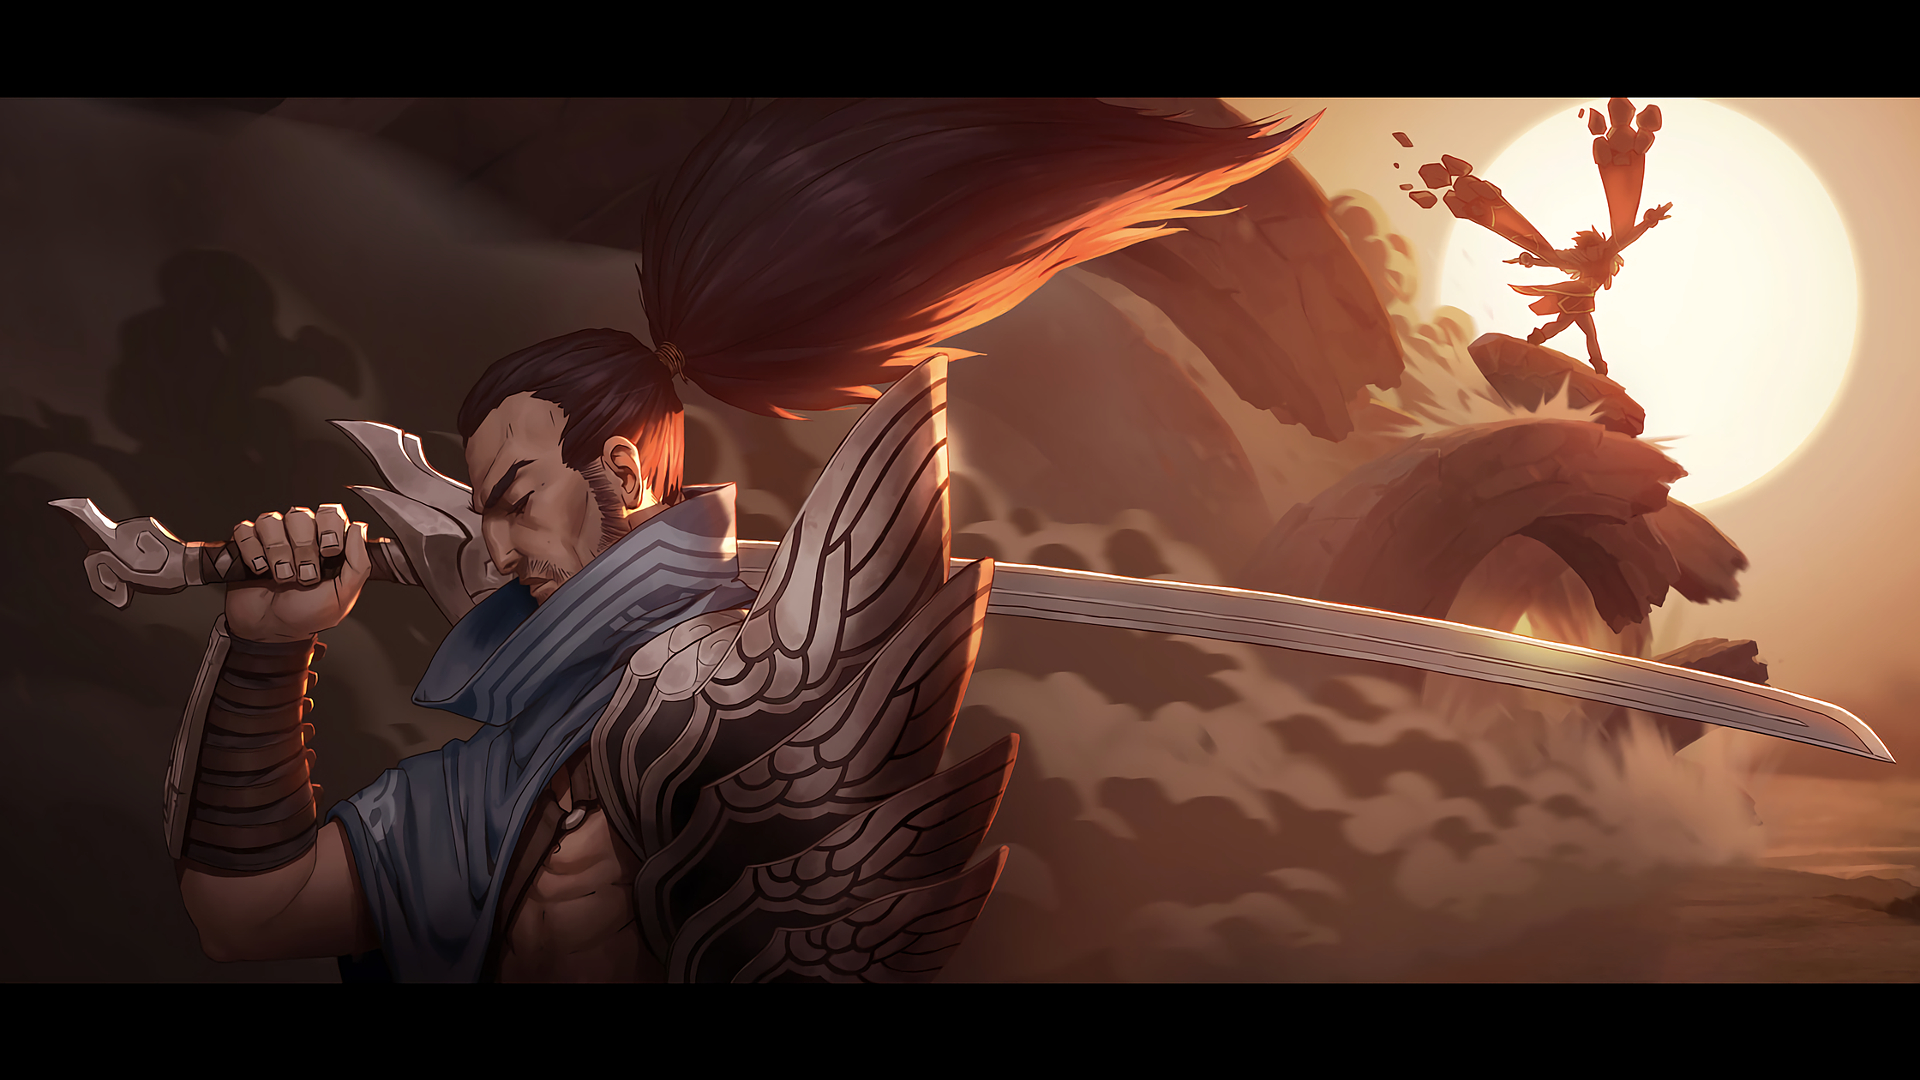 video game, league of legends, taliyah (league of legends), yasuo (league of legends) wallpaper for mobile